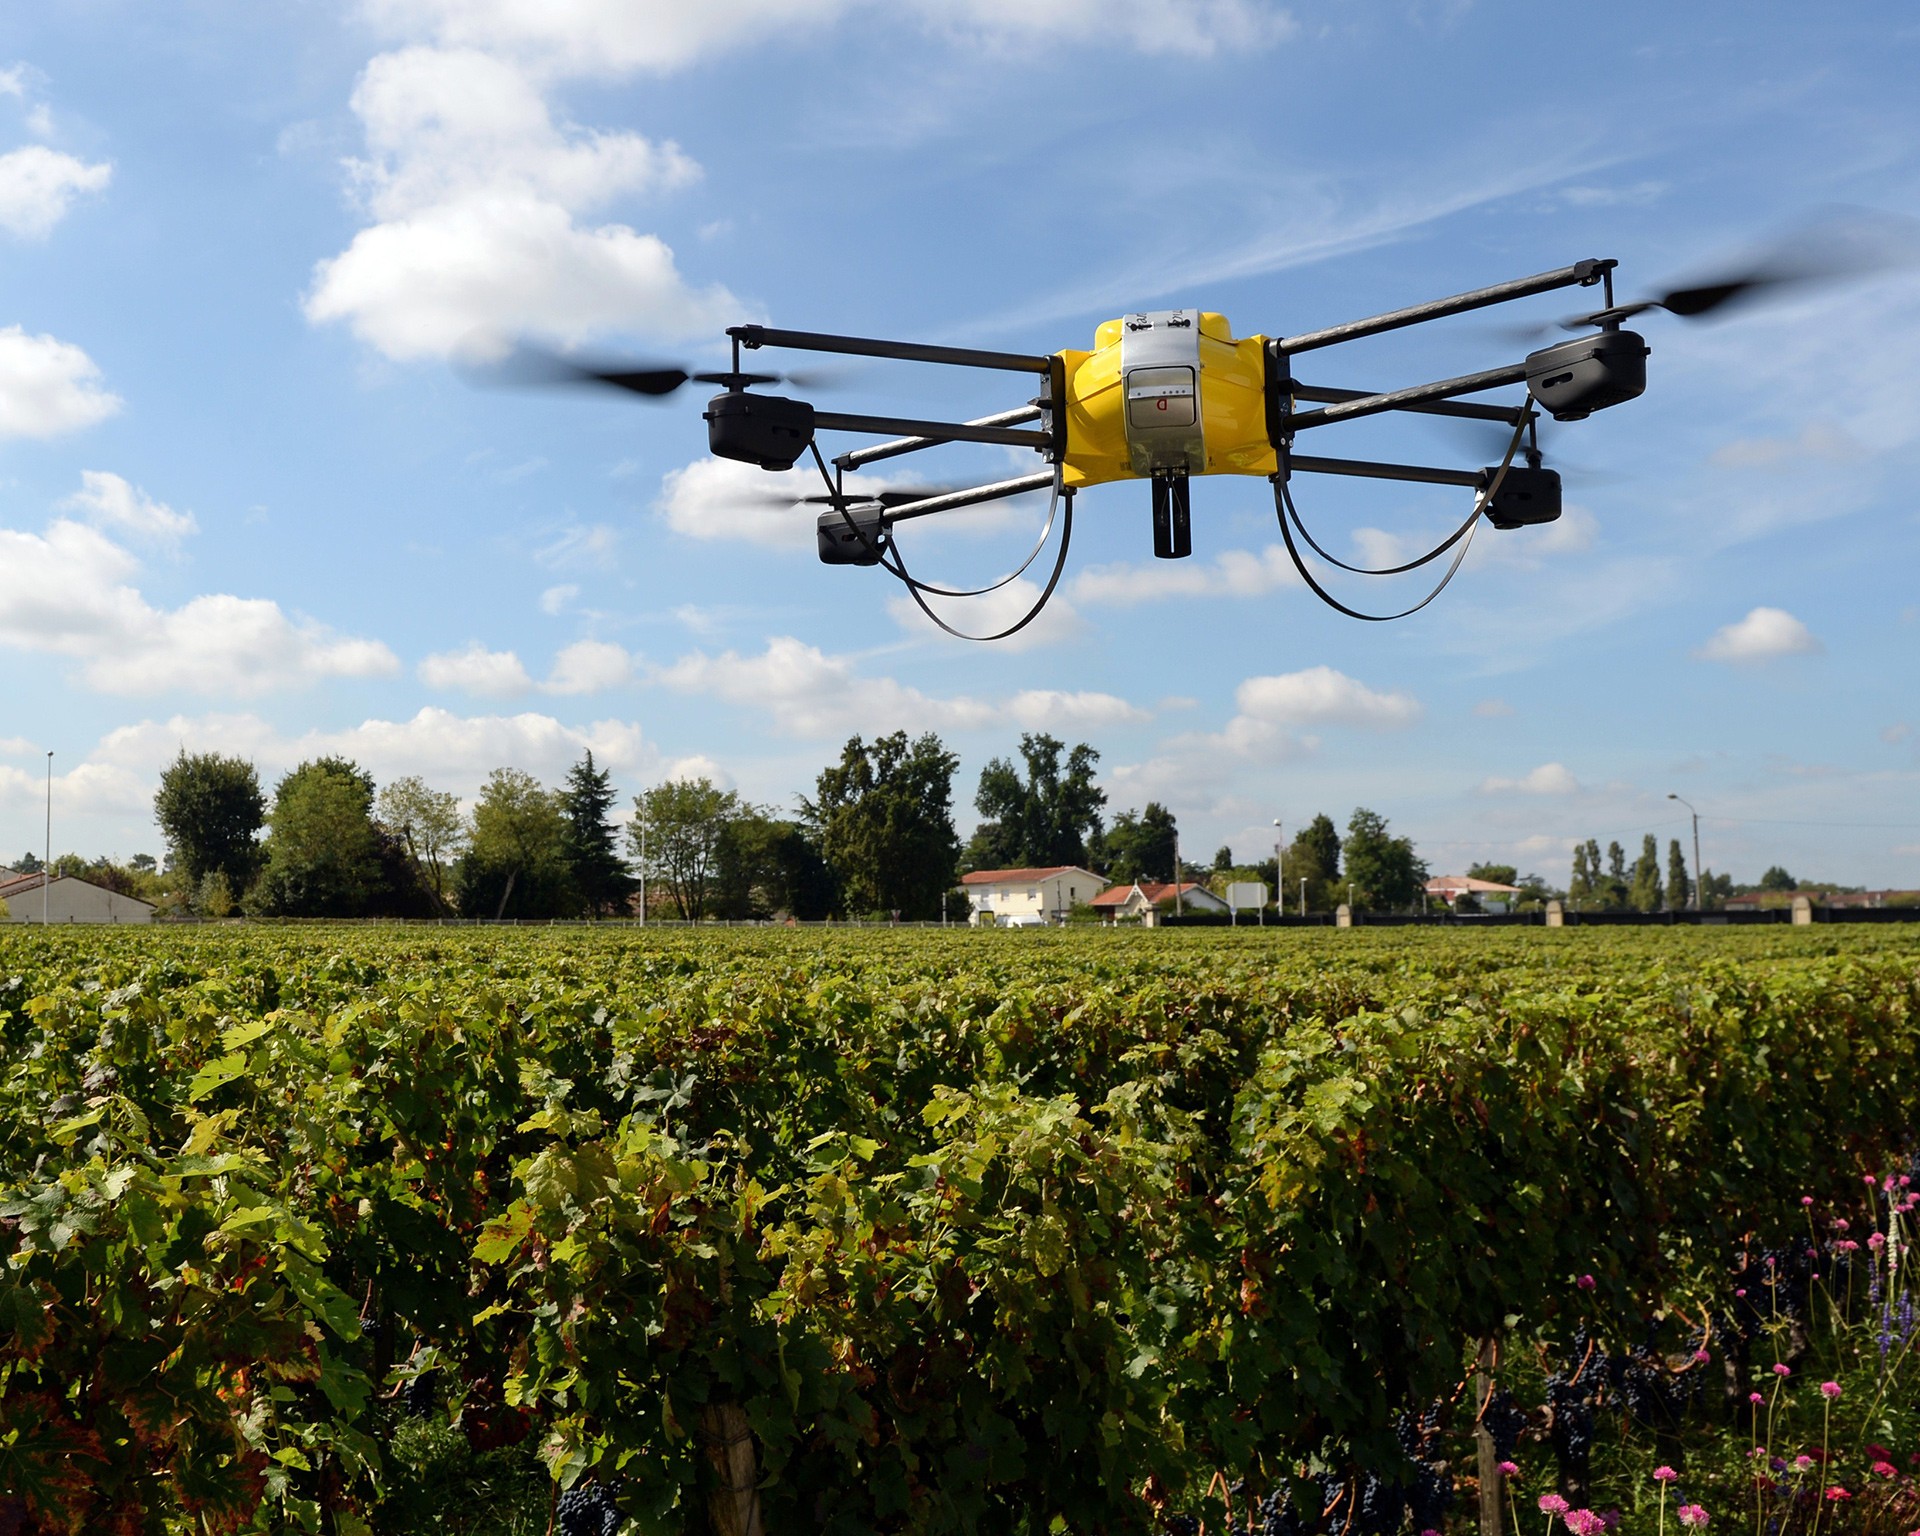 agriculture-drones.jpg - 722.73 کیلو بایت